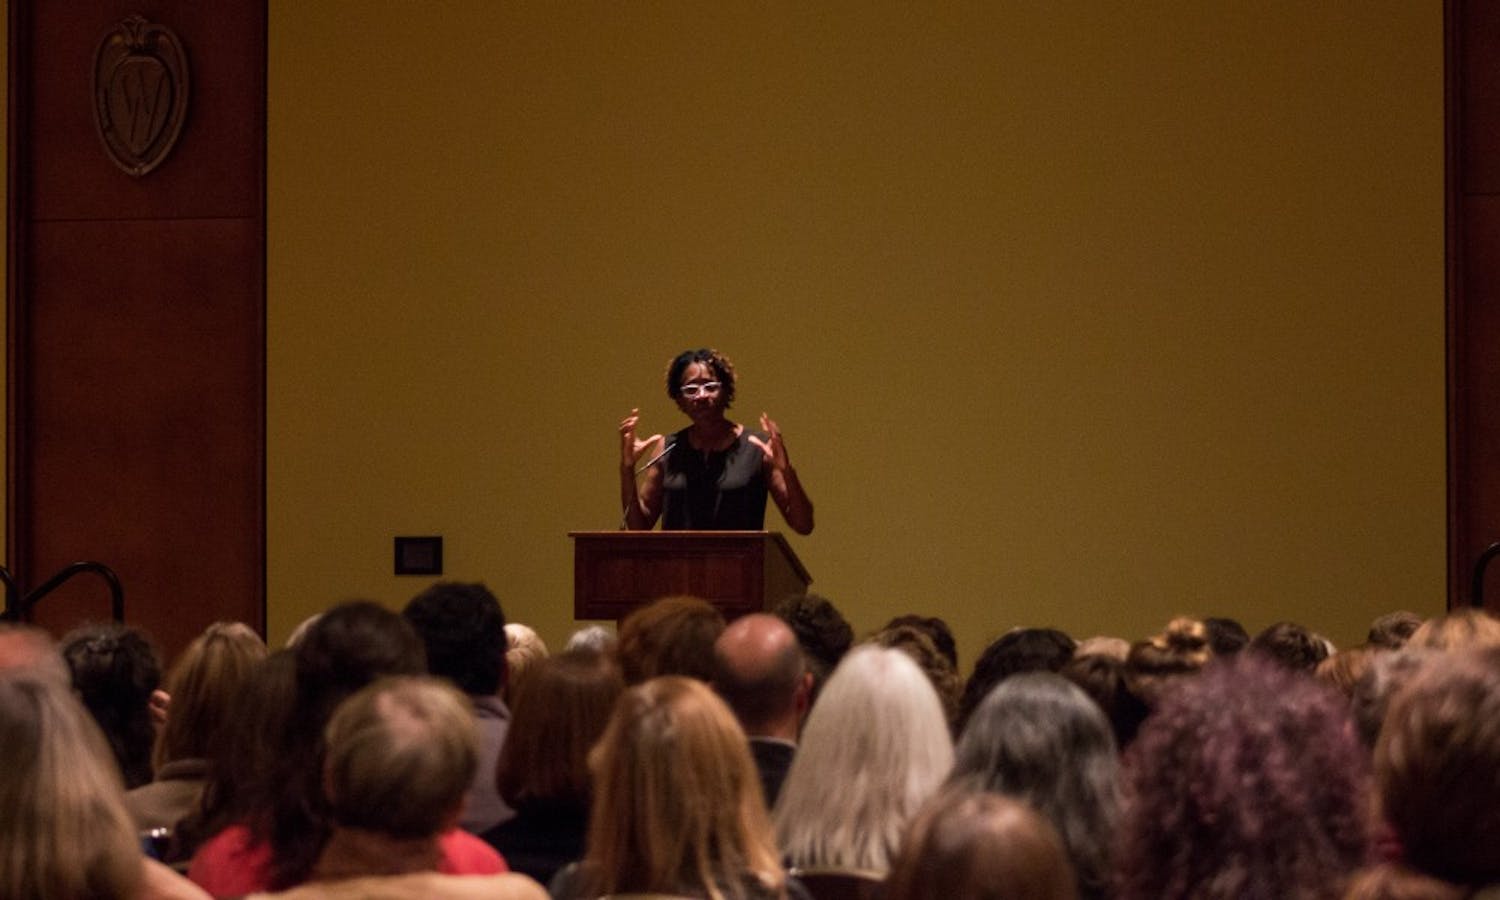 Author Jacqueline Woodson discssued how she thought about her own identity, especially as a female of color, while writer her award-winning books.